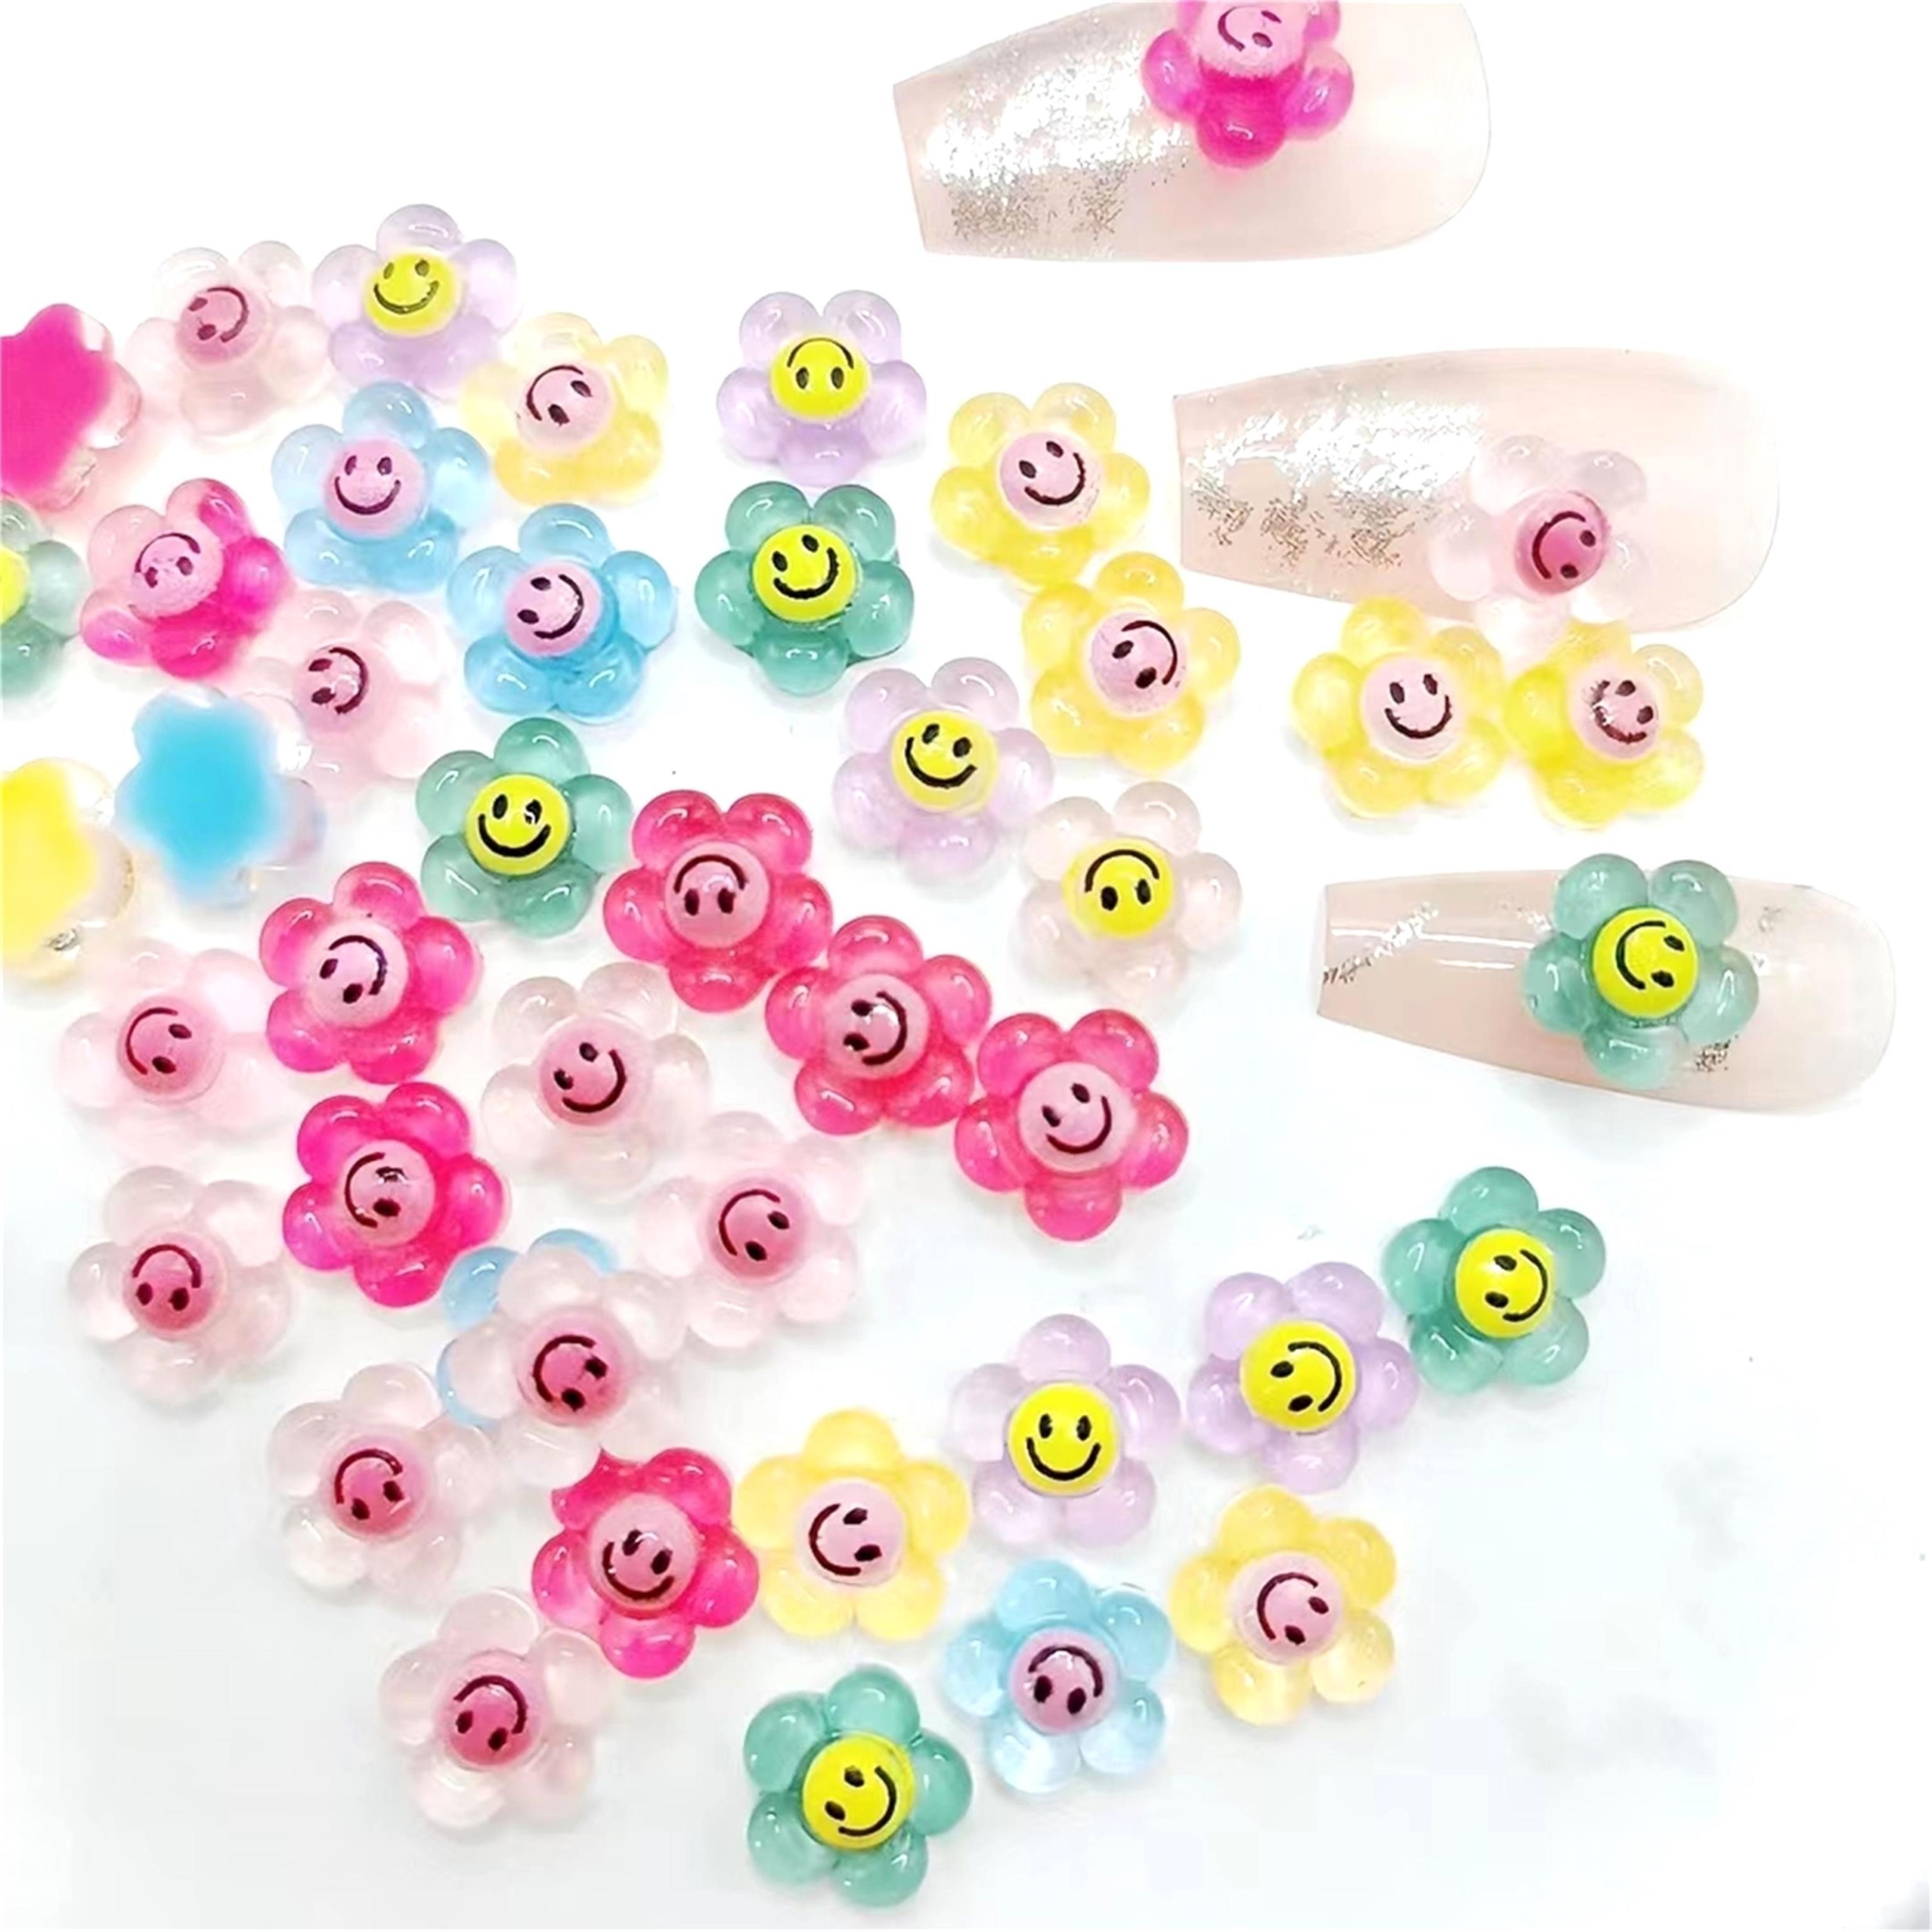 

50pcs Resin Cute Mini Kawaii Smile Face Flower Nail Charms, Flat Scrapbook Rhinestones 3d For Woman Girls Nail Charms Manicure Decorations Jewelry Accessories